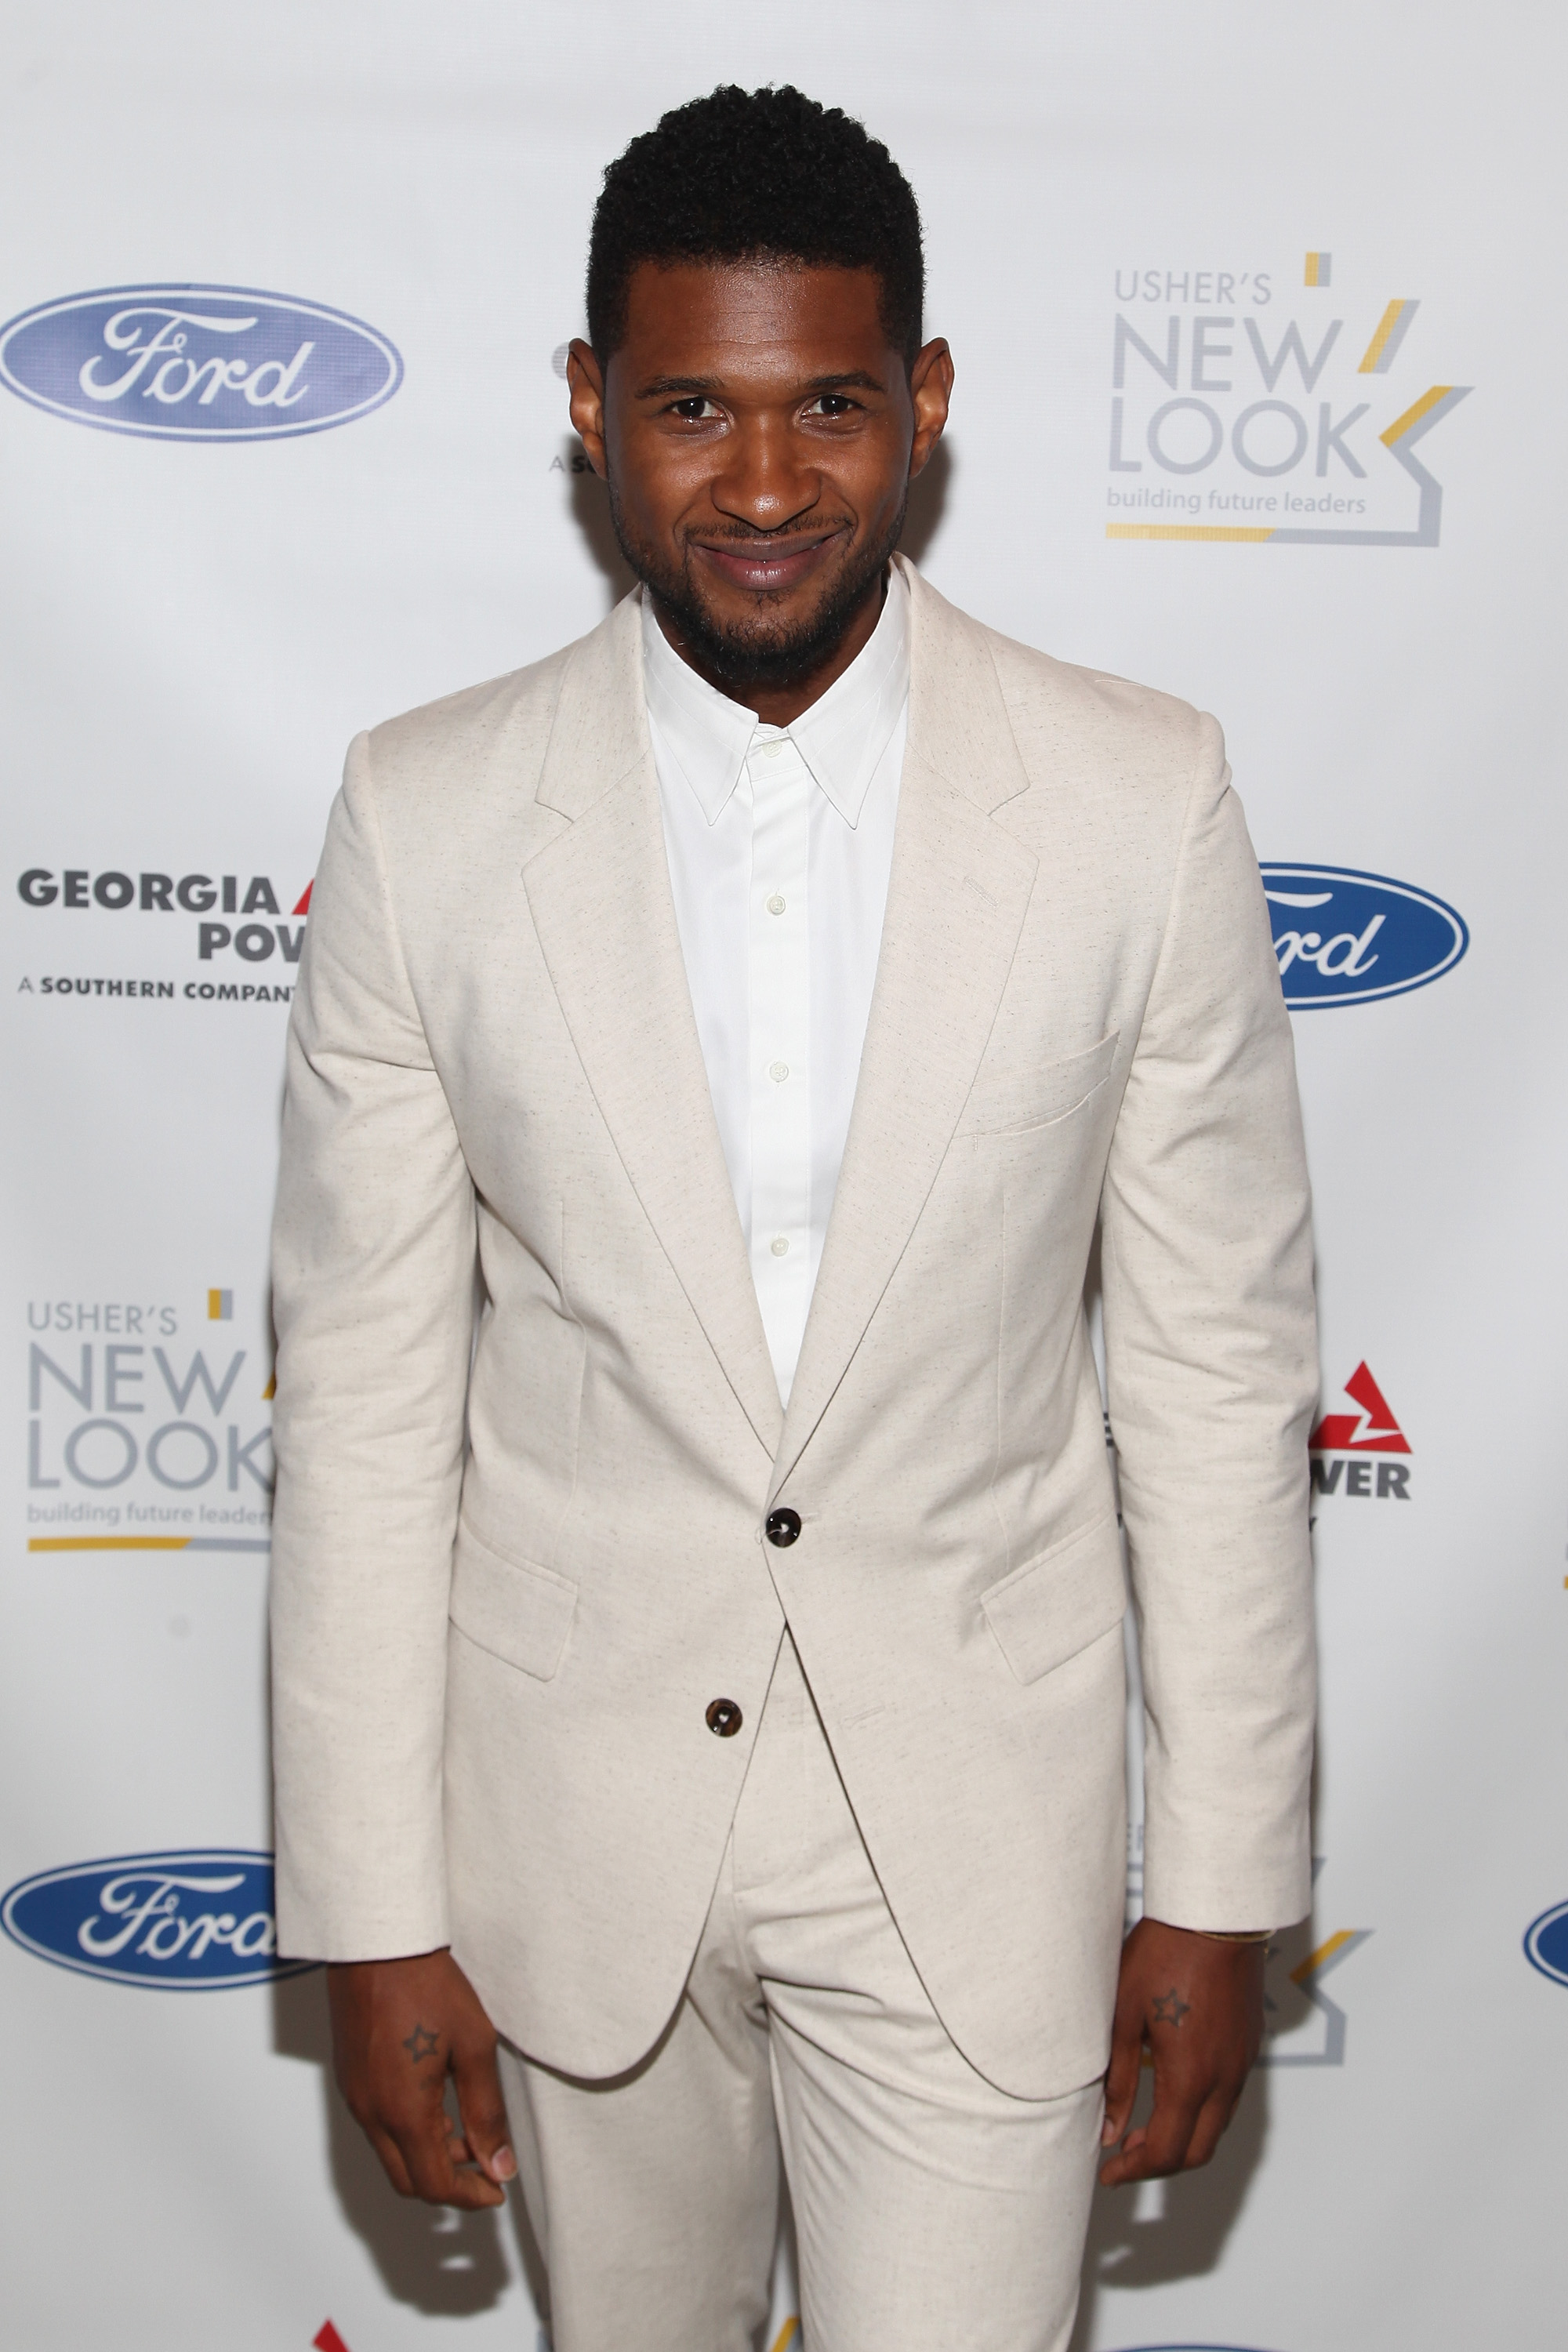 Usher's New Look Hosts 2013 President's Circle Awards Luncheon Black